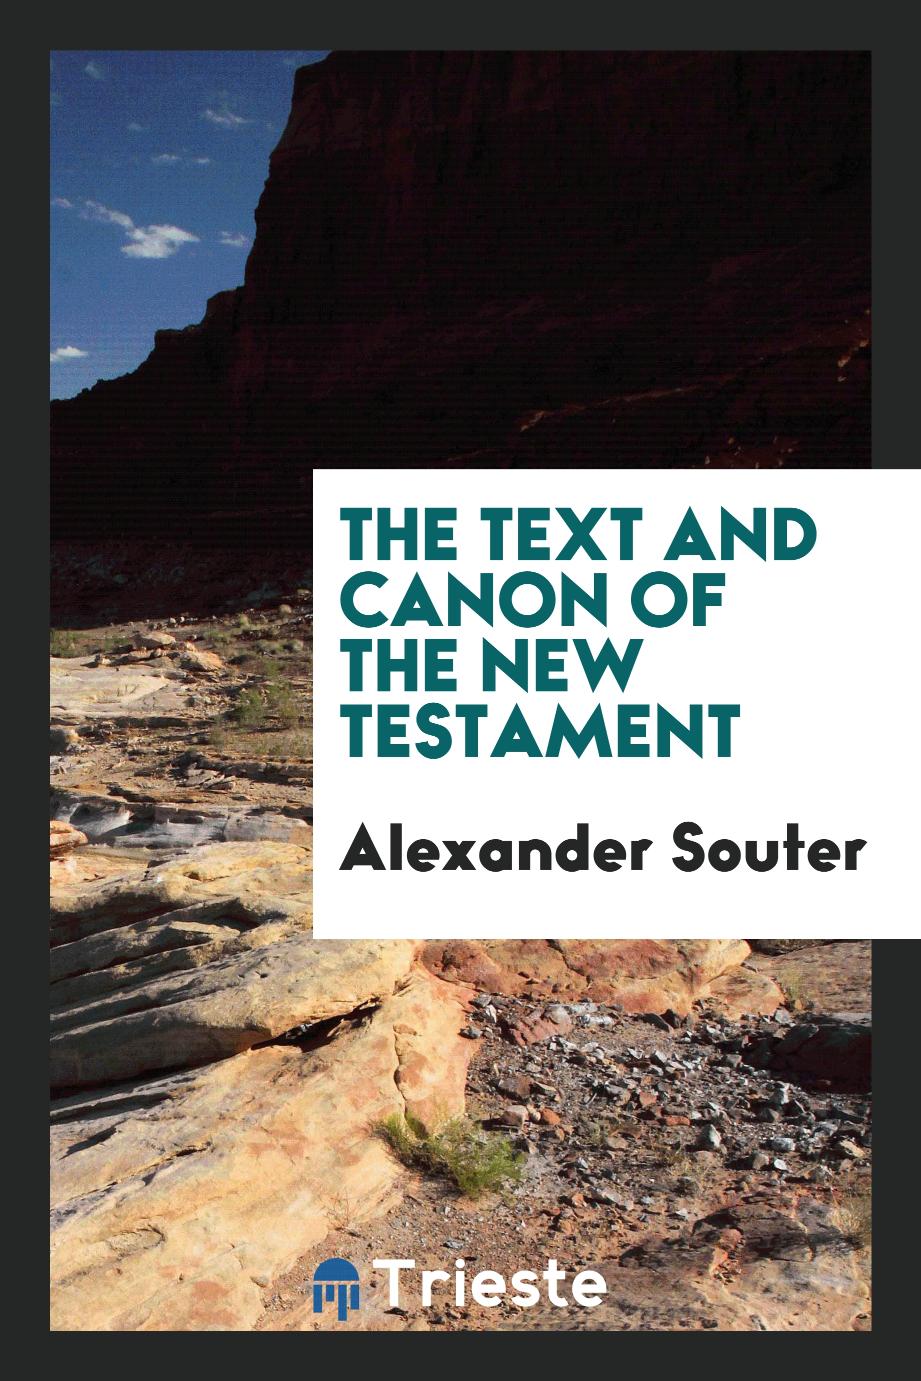 The text and canon of the New Testament